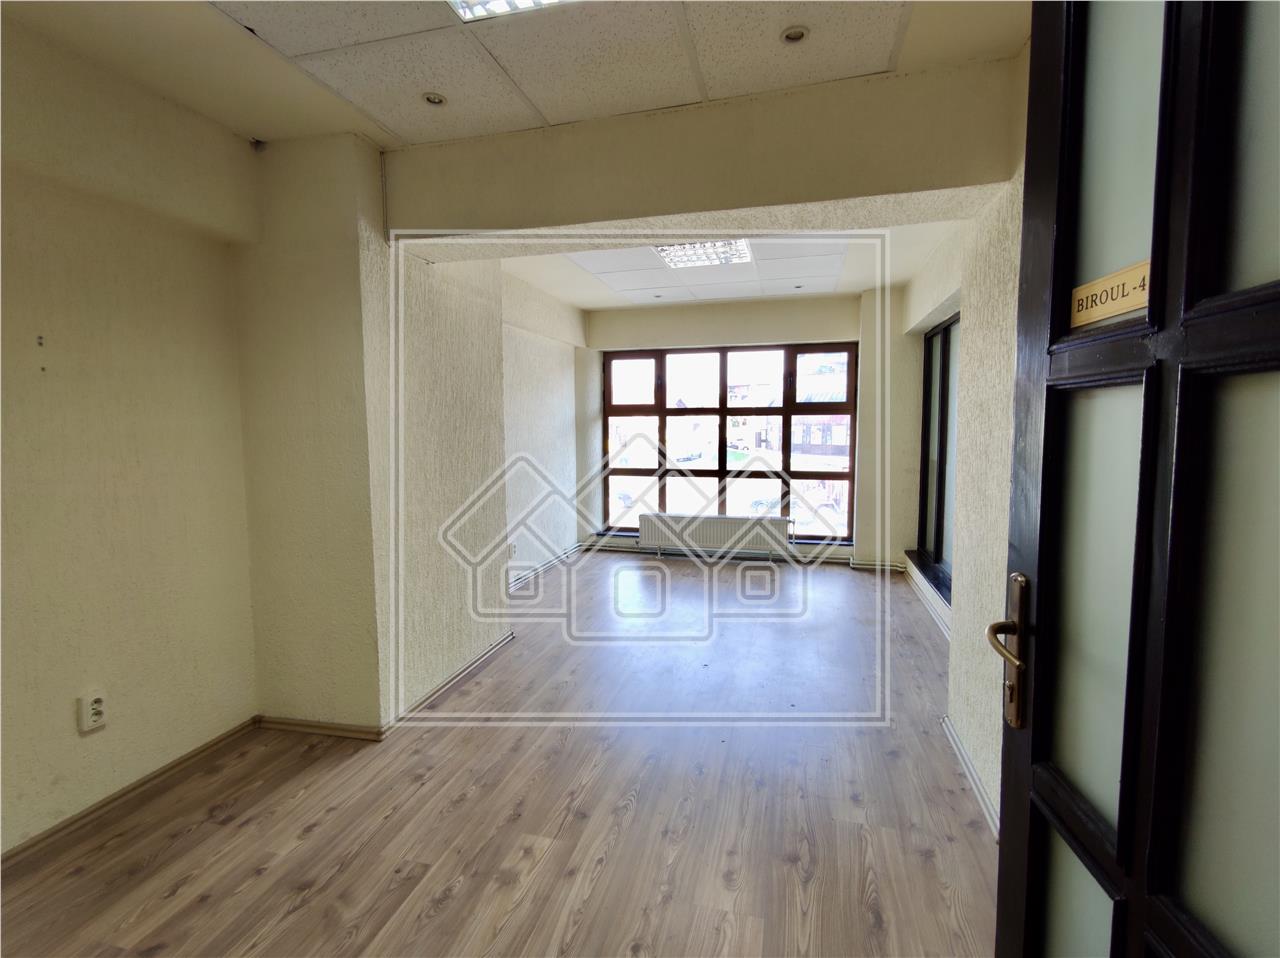 Office space for sale in Sibiu - with separate entrance